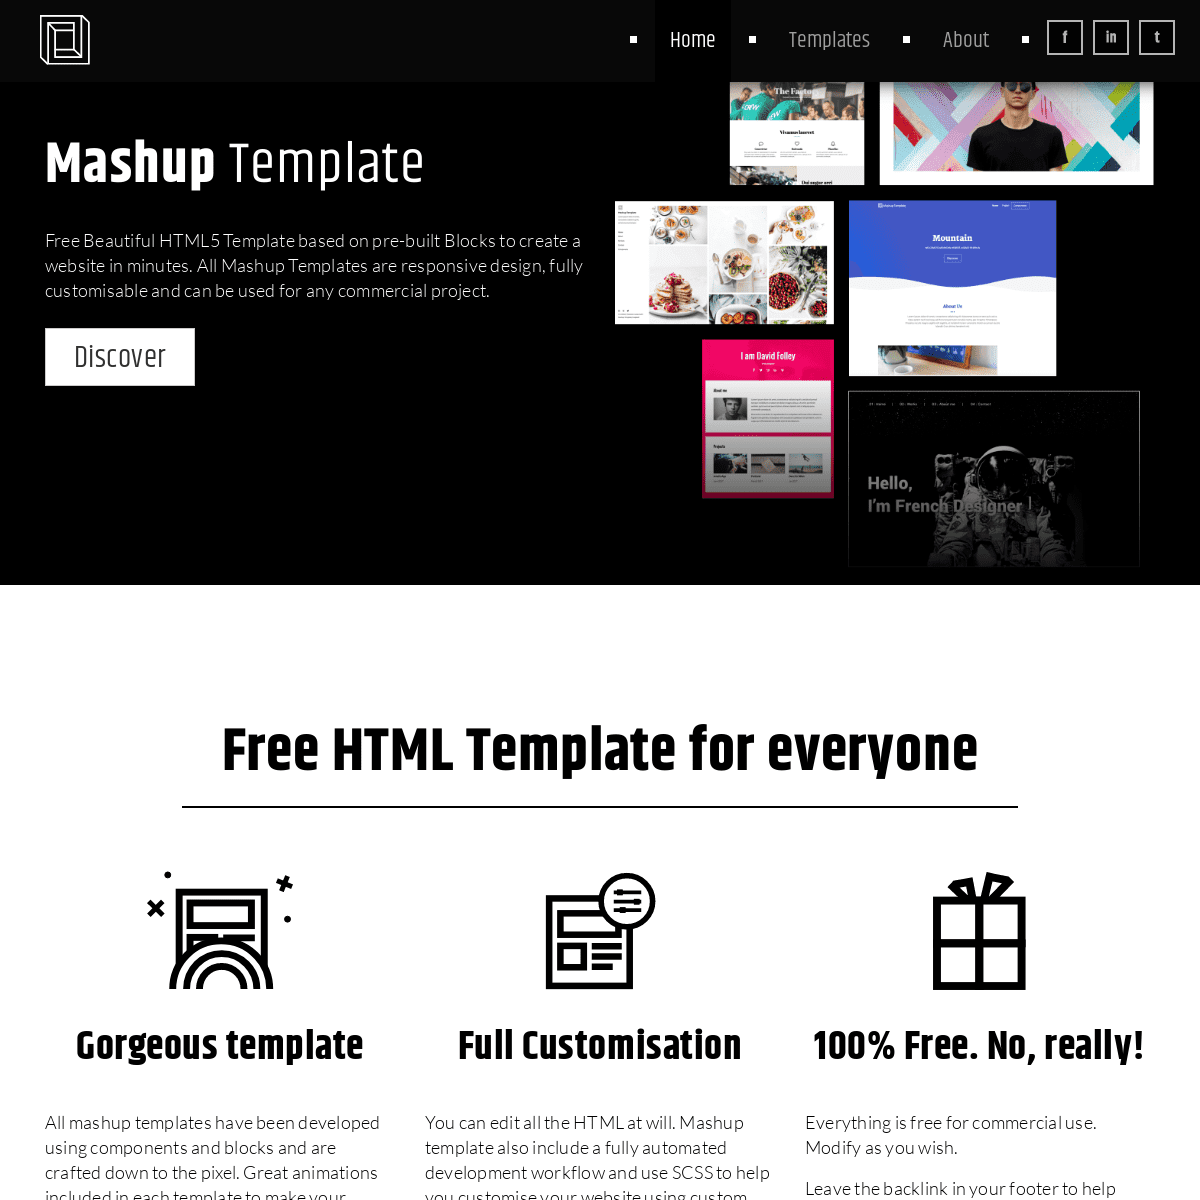 A complete backup of https://mashup-template.com